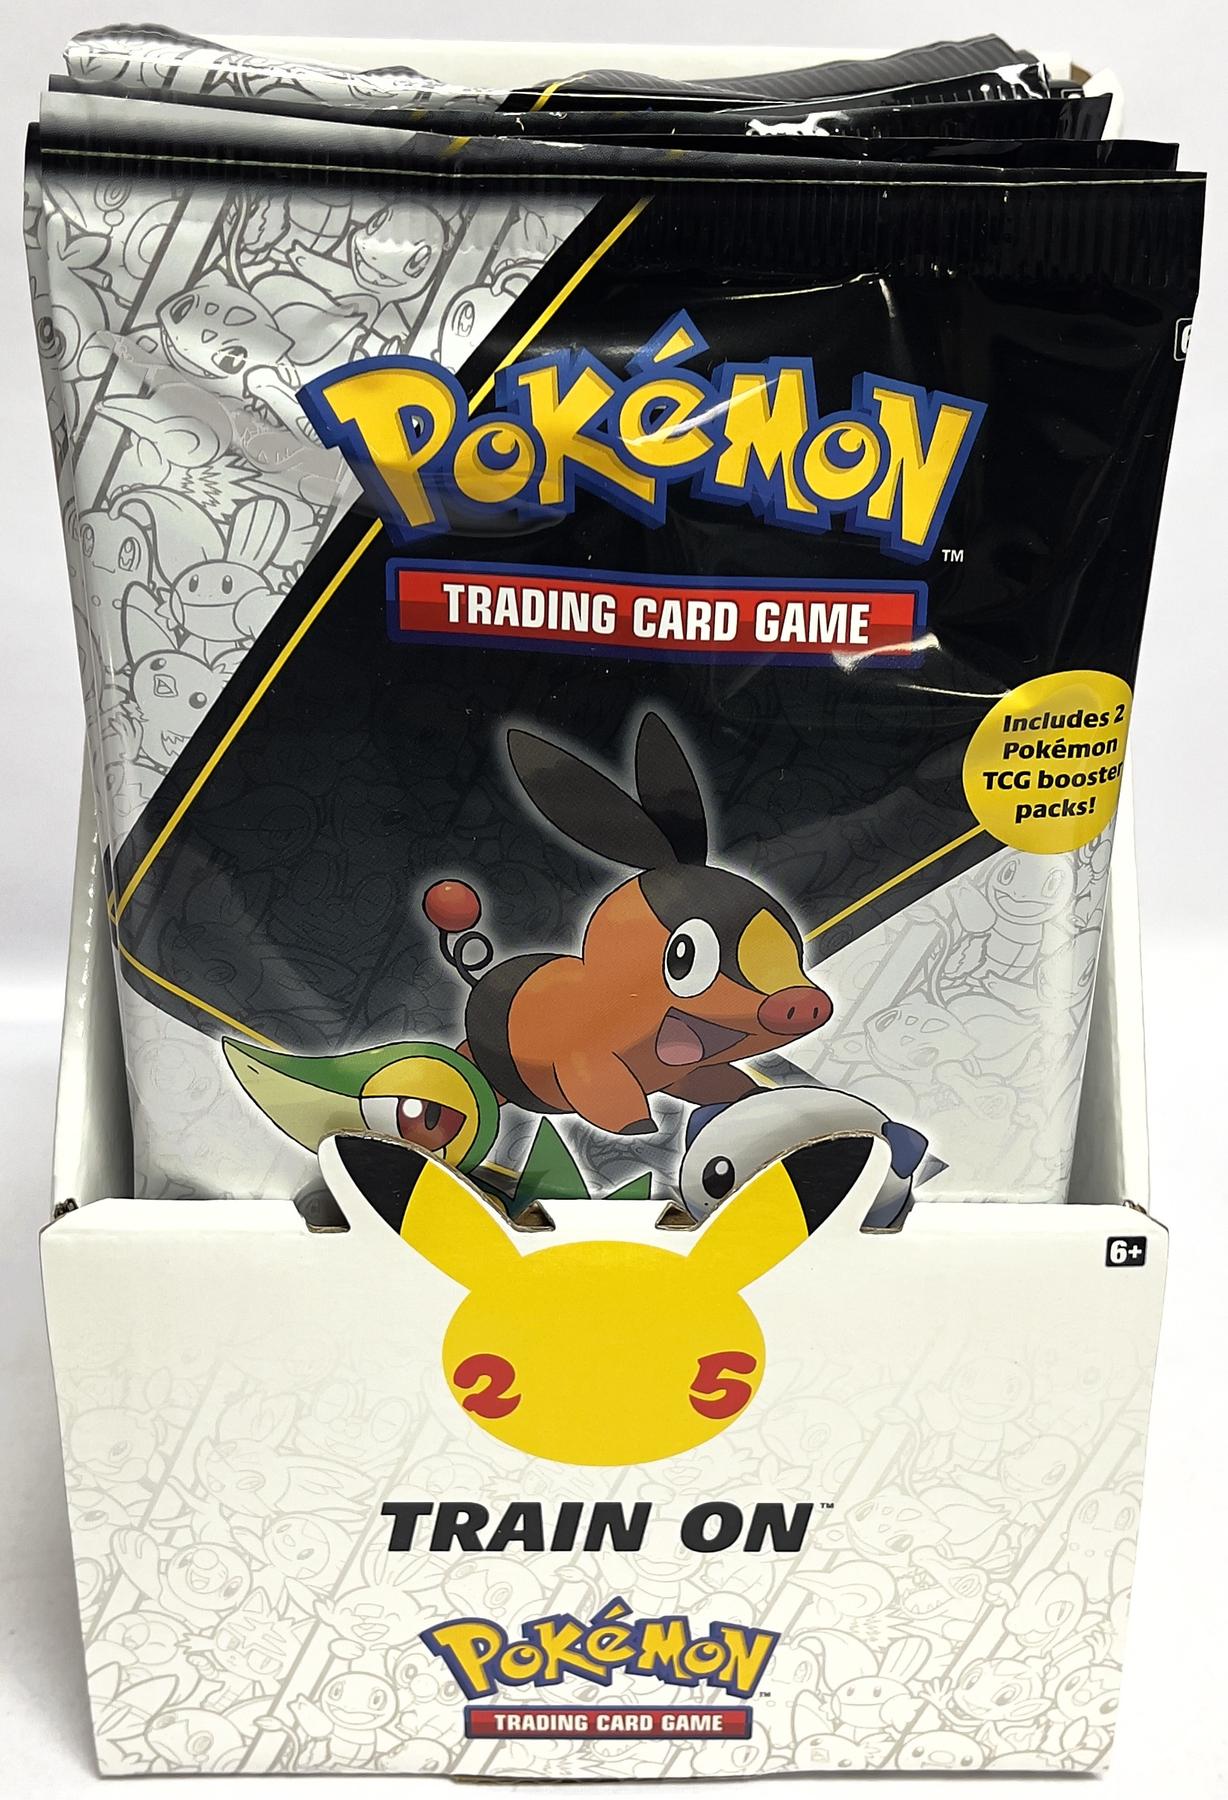 POKEMON TRADE & PLAY DAY KIT BOOSTER PACK plus 3 packs of 3 cards